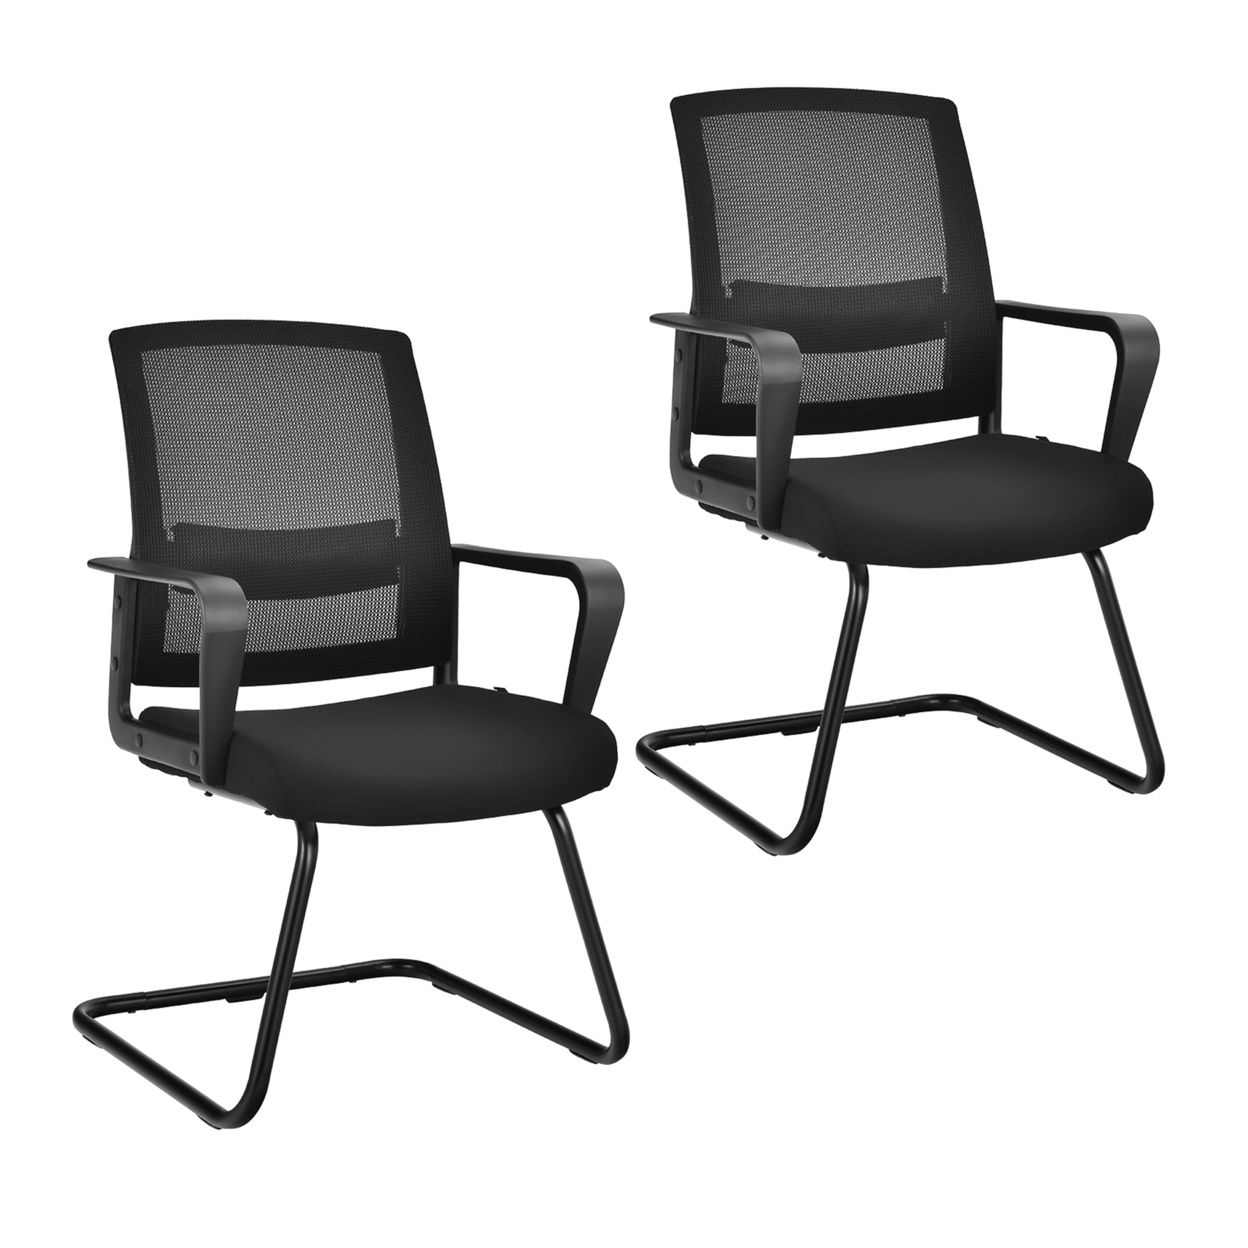 Set Of 2 Conference Chairs Mesh Reception Office Guest Chairs W/ Lumbar Support